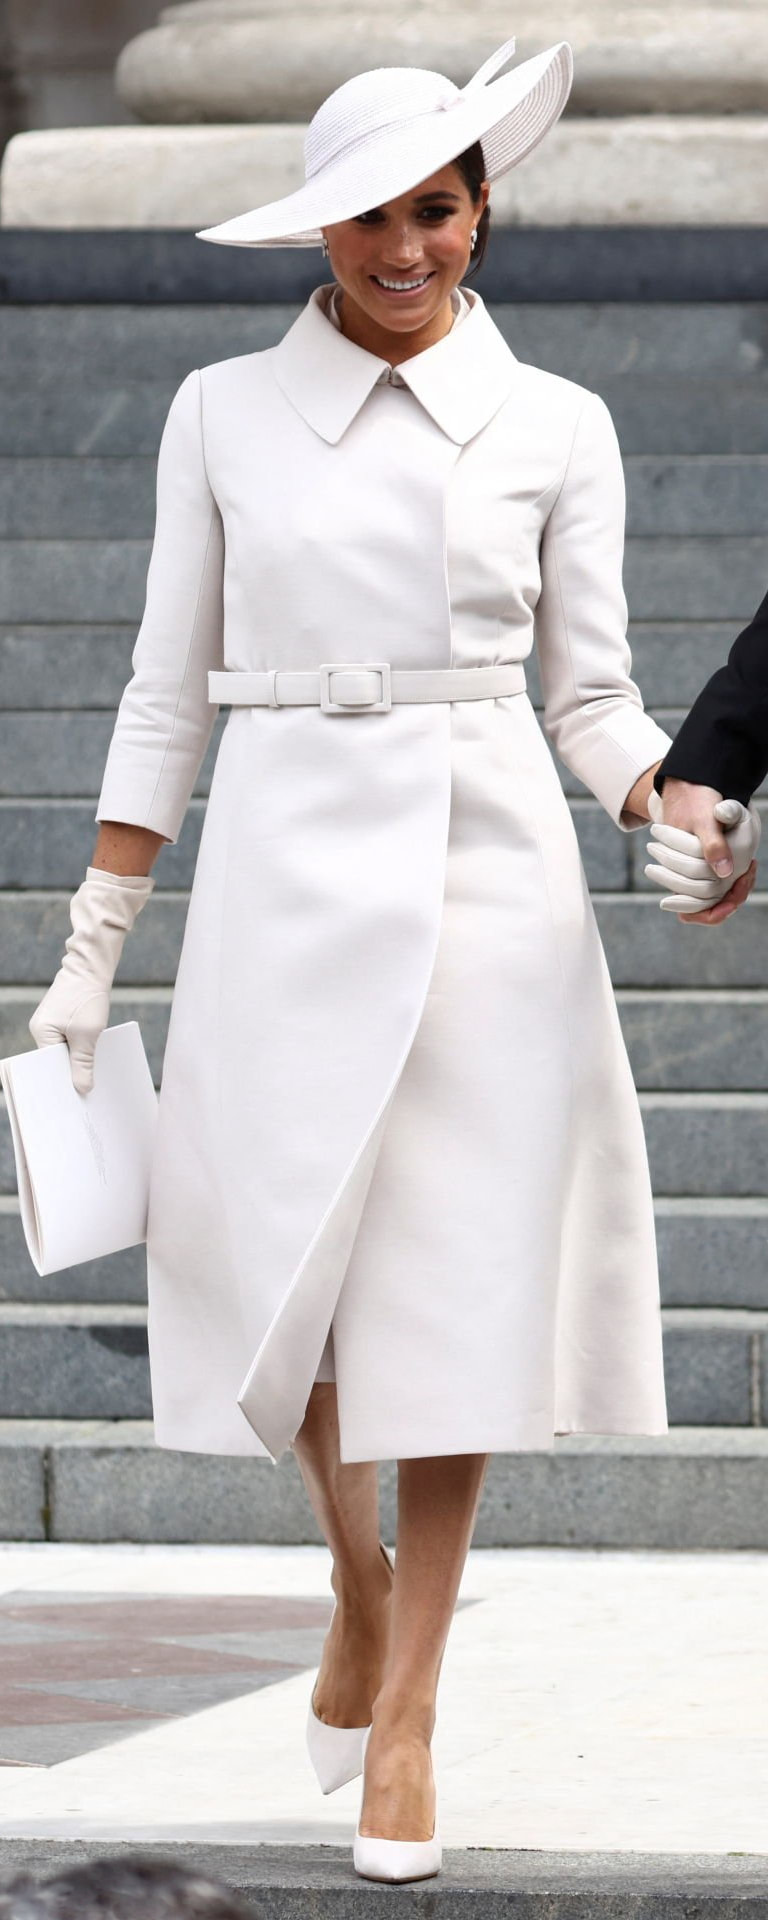 Dior Haute Couture Trench Coat in Greige as seen on Meghan Markle, The Duchess of Sussex.